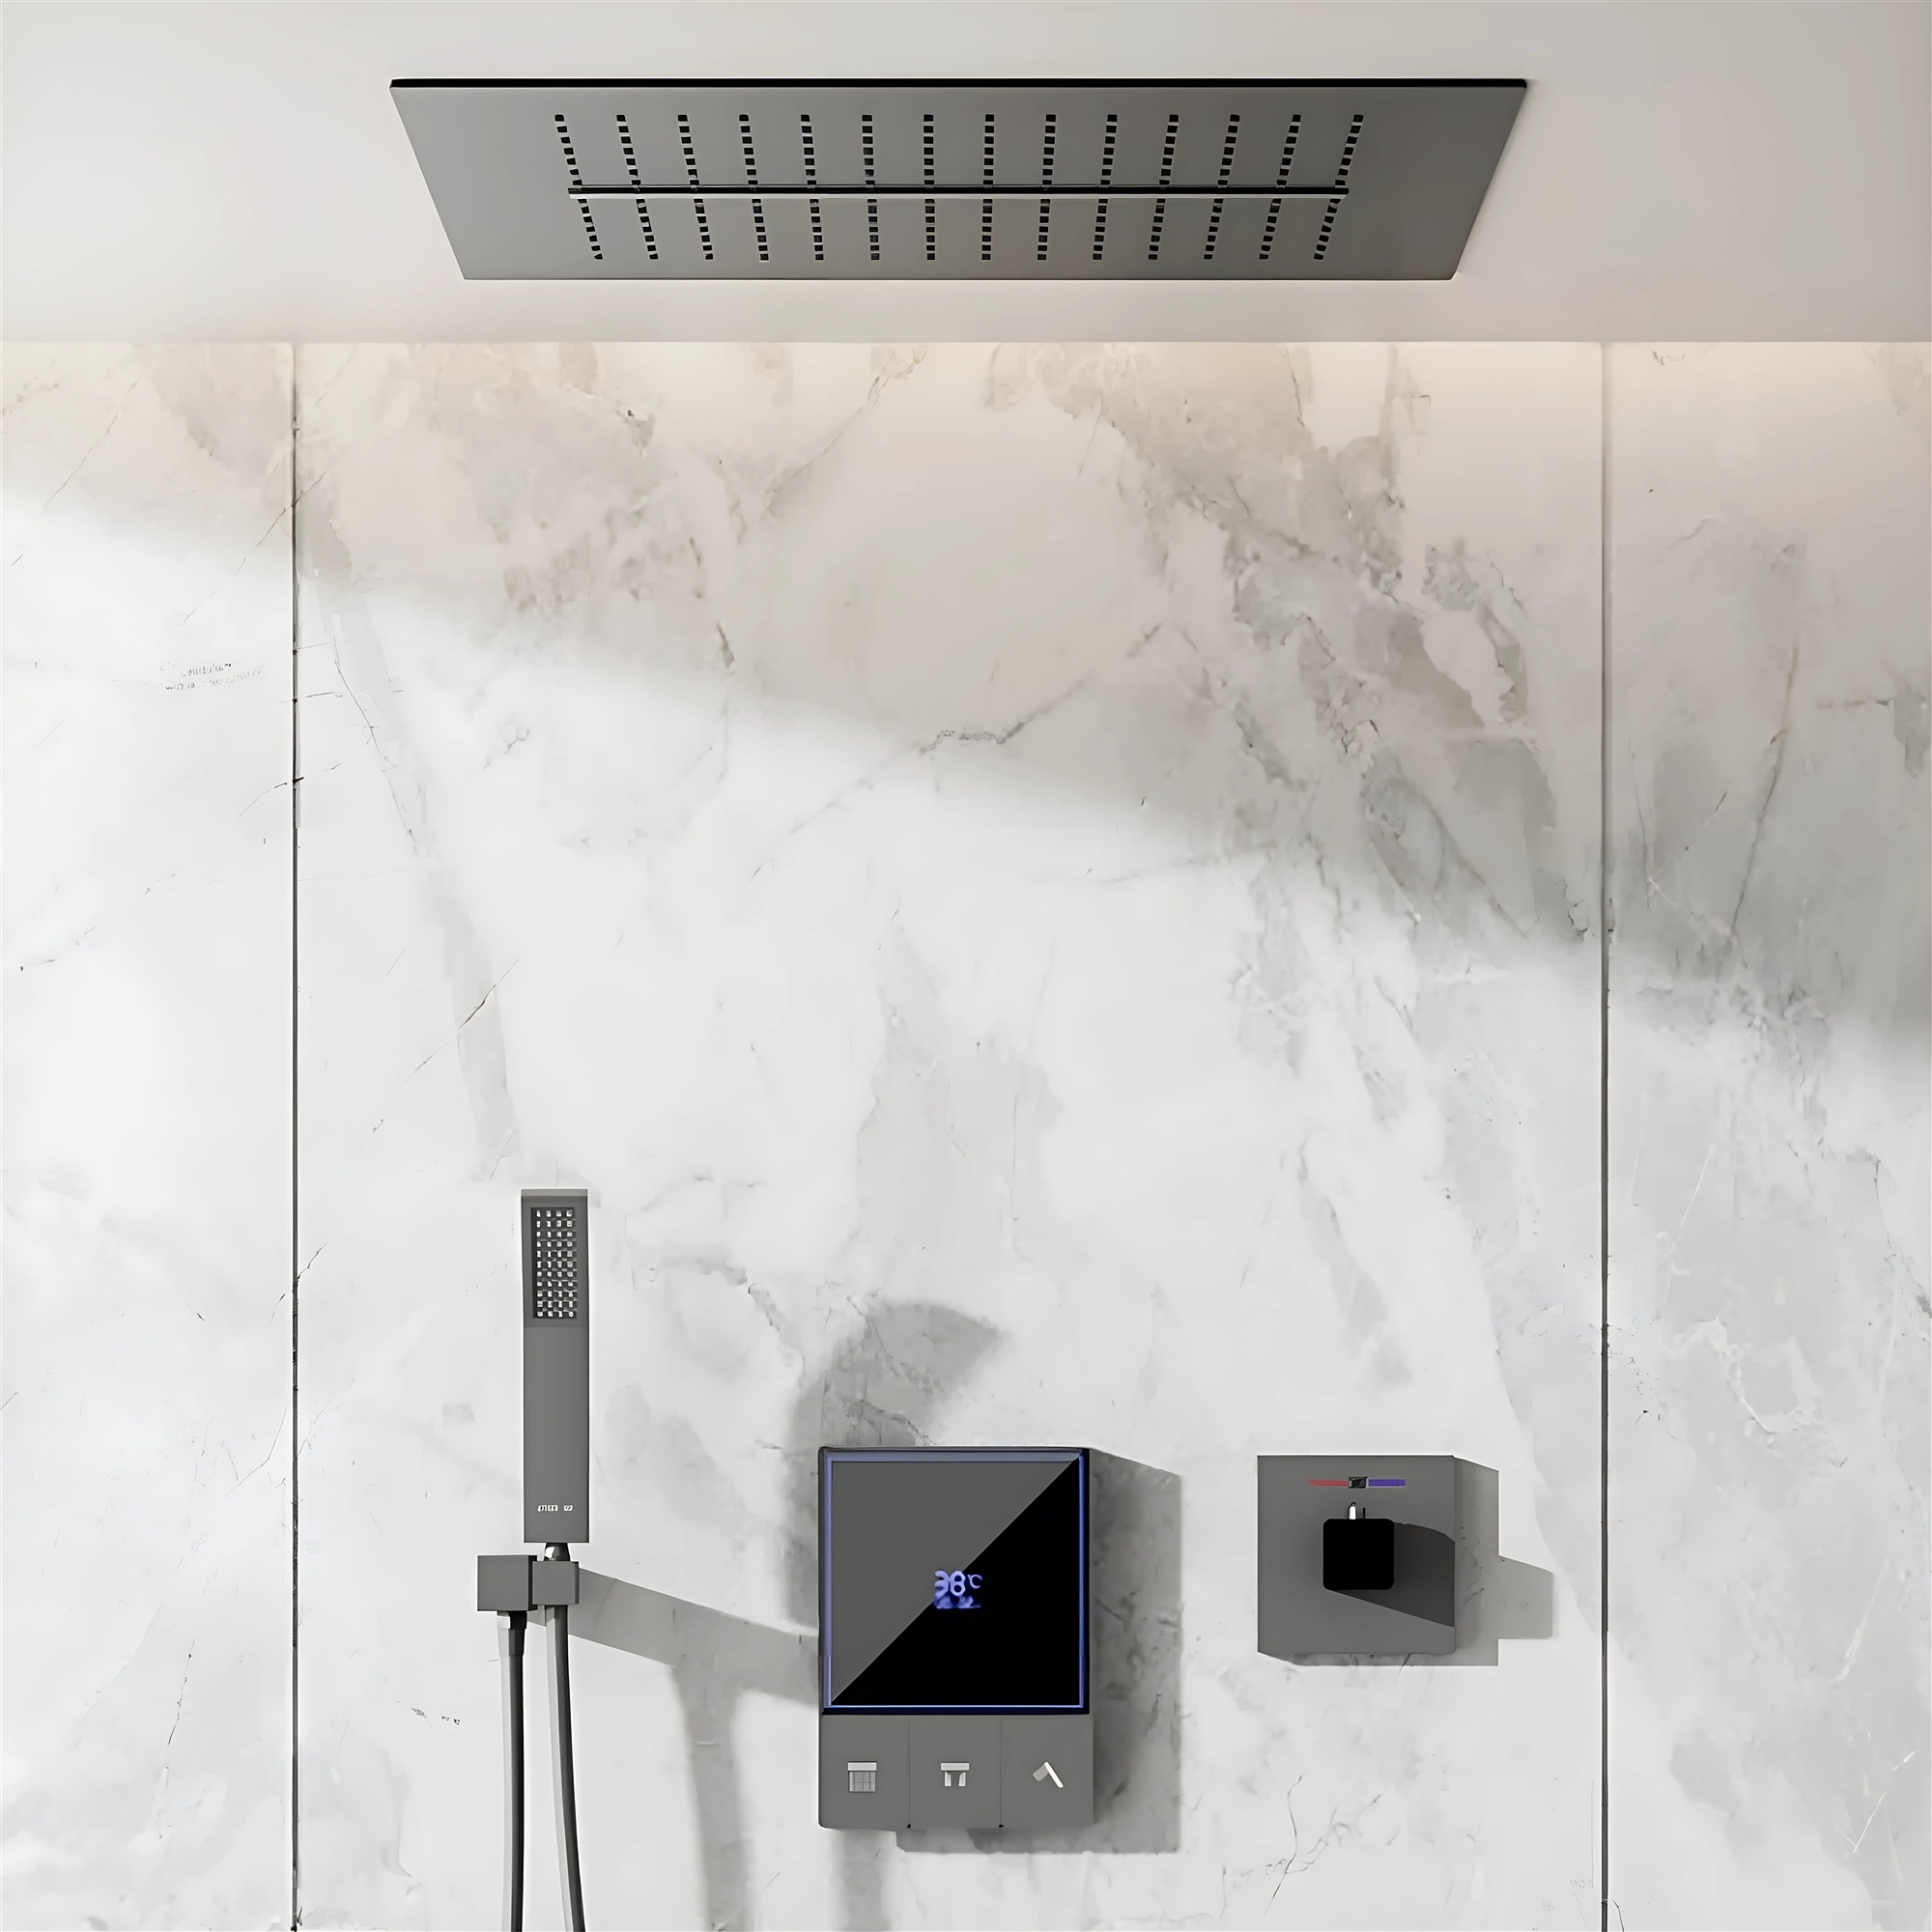 Fontana 3 Function In Gun Gray Finish Smart Temperature Thermostatic Display Shower System